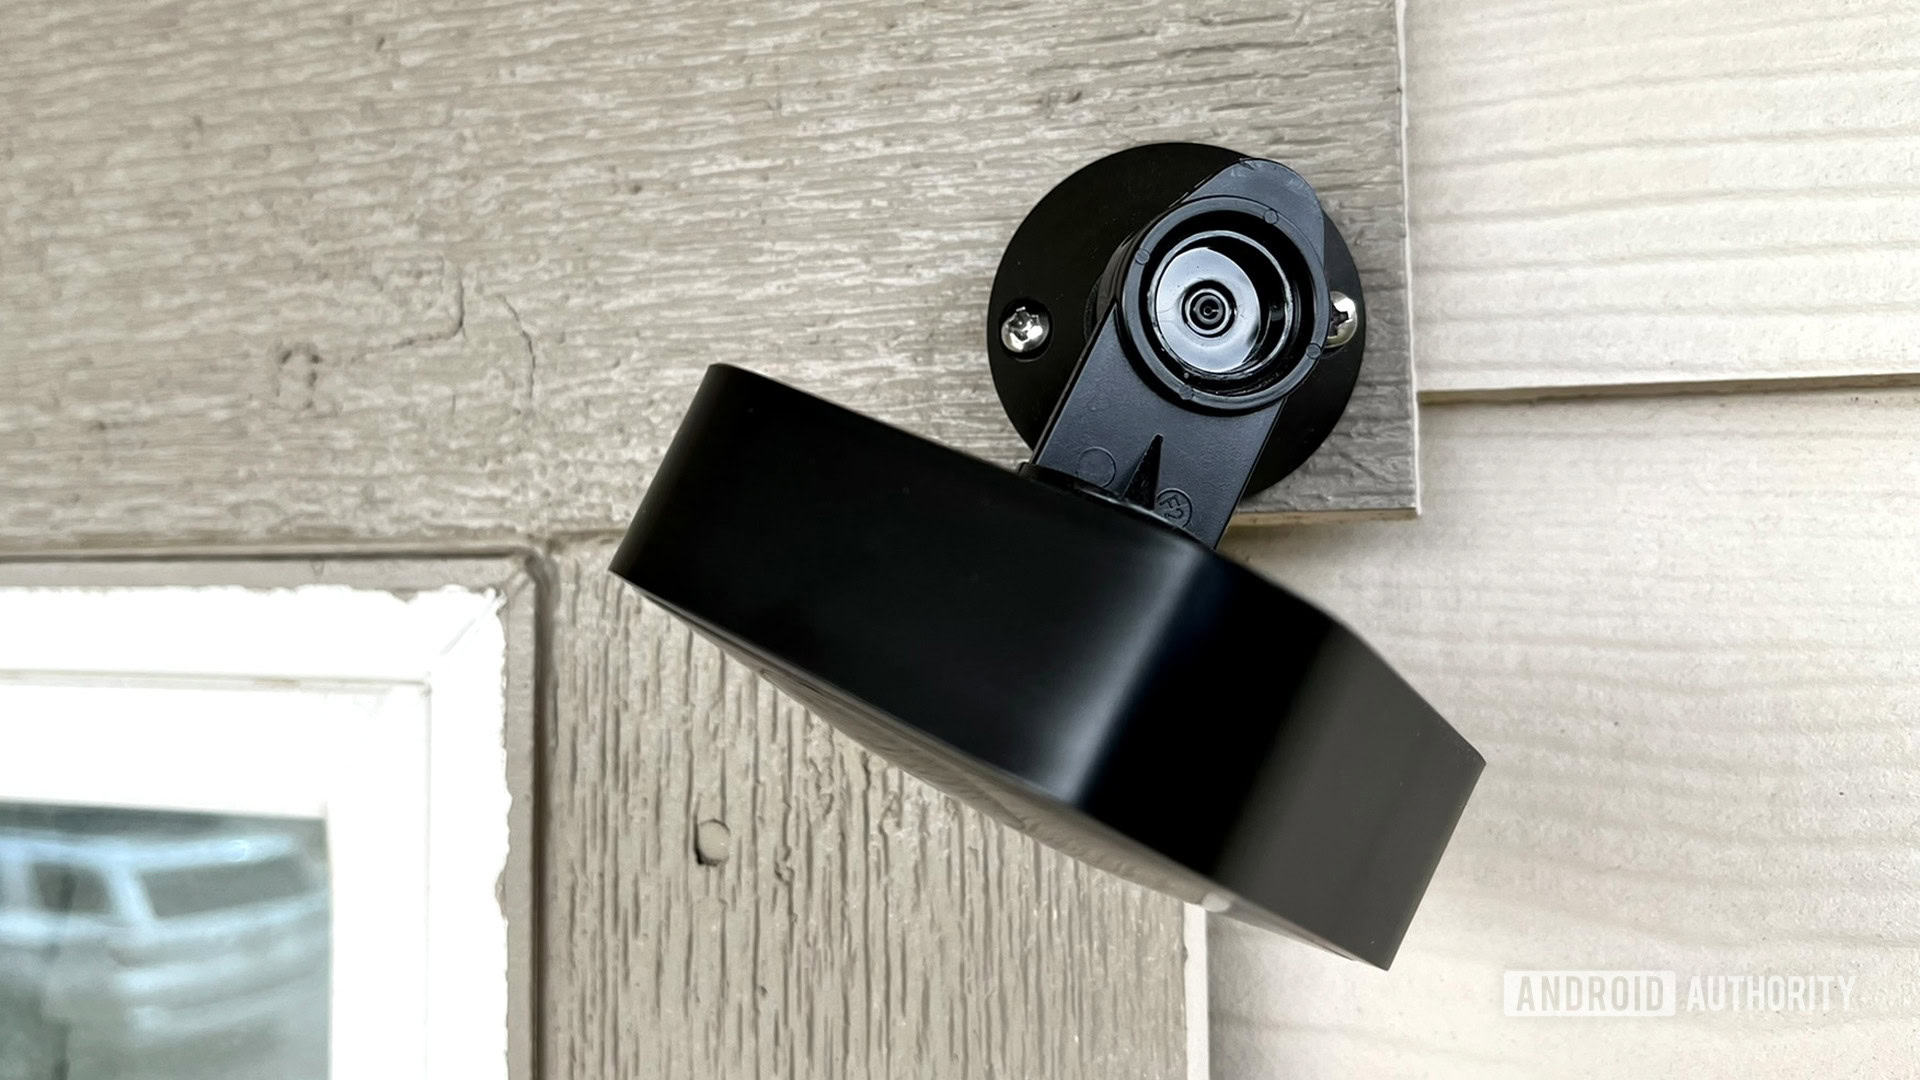 The mount for the Blink Outdoor security camera